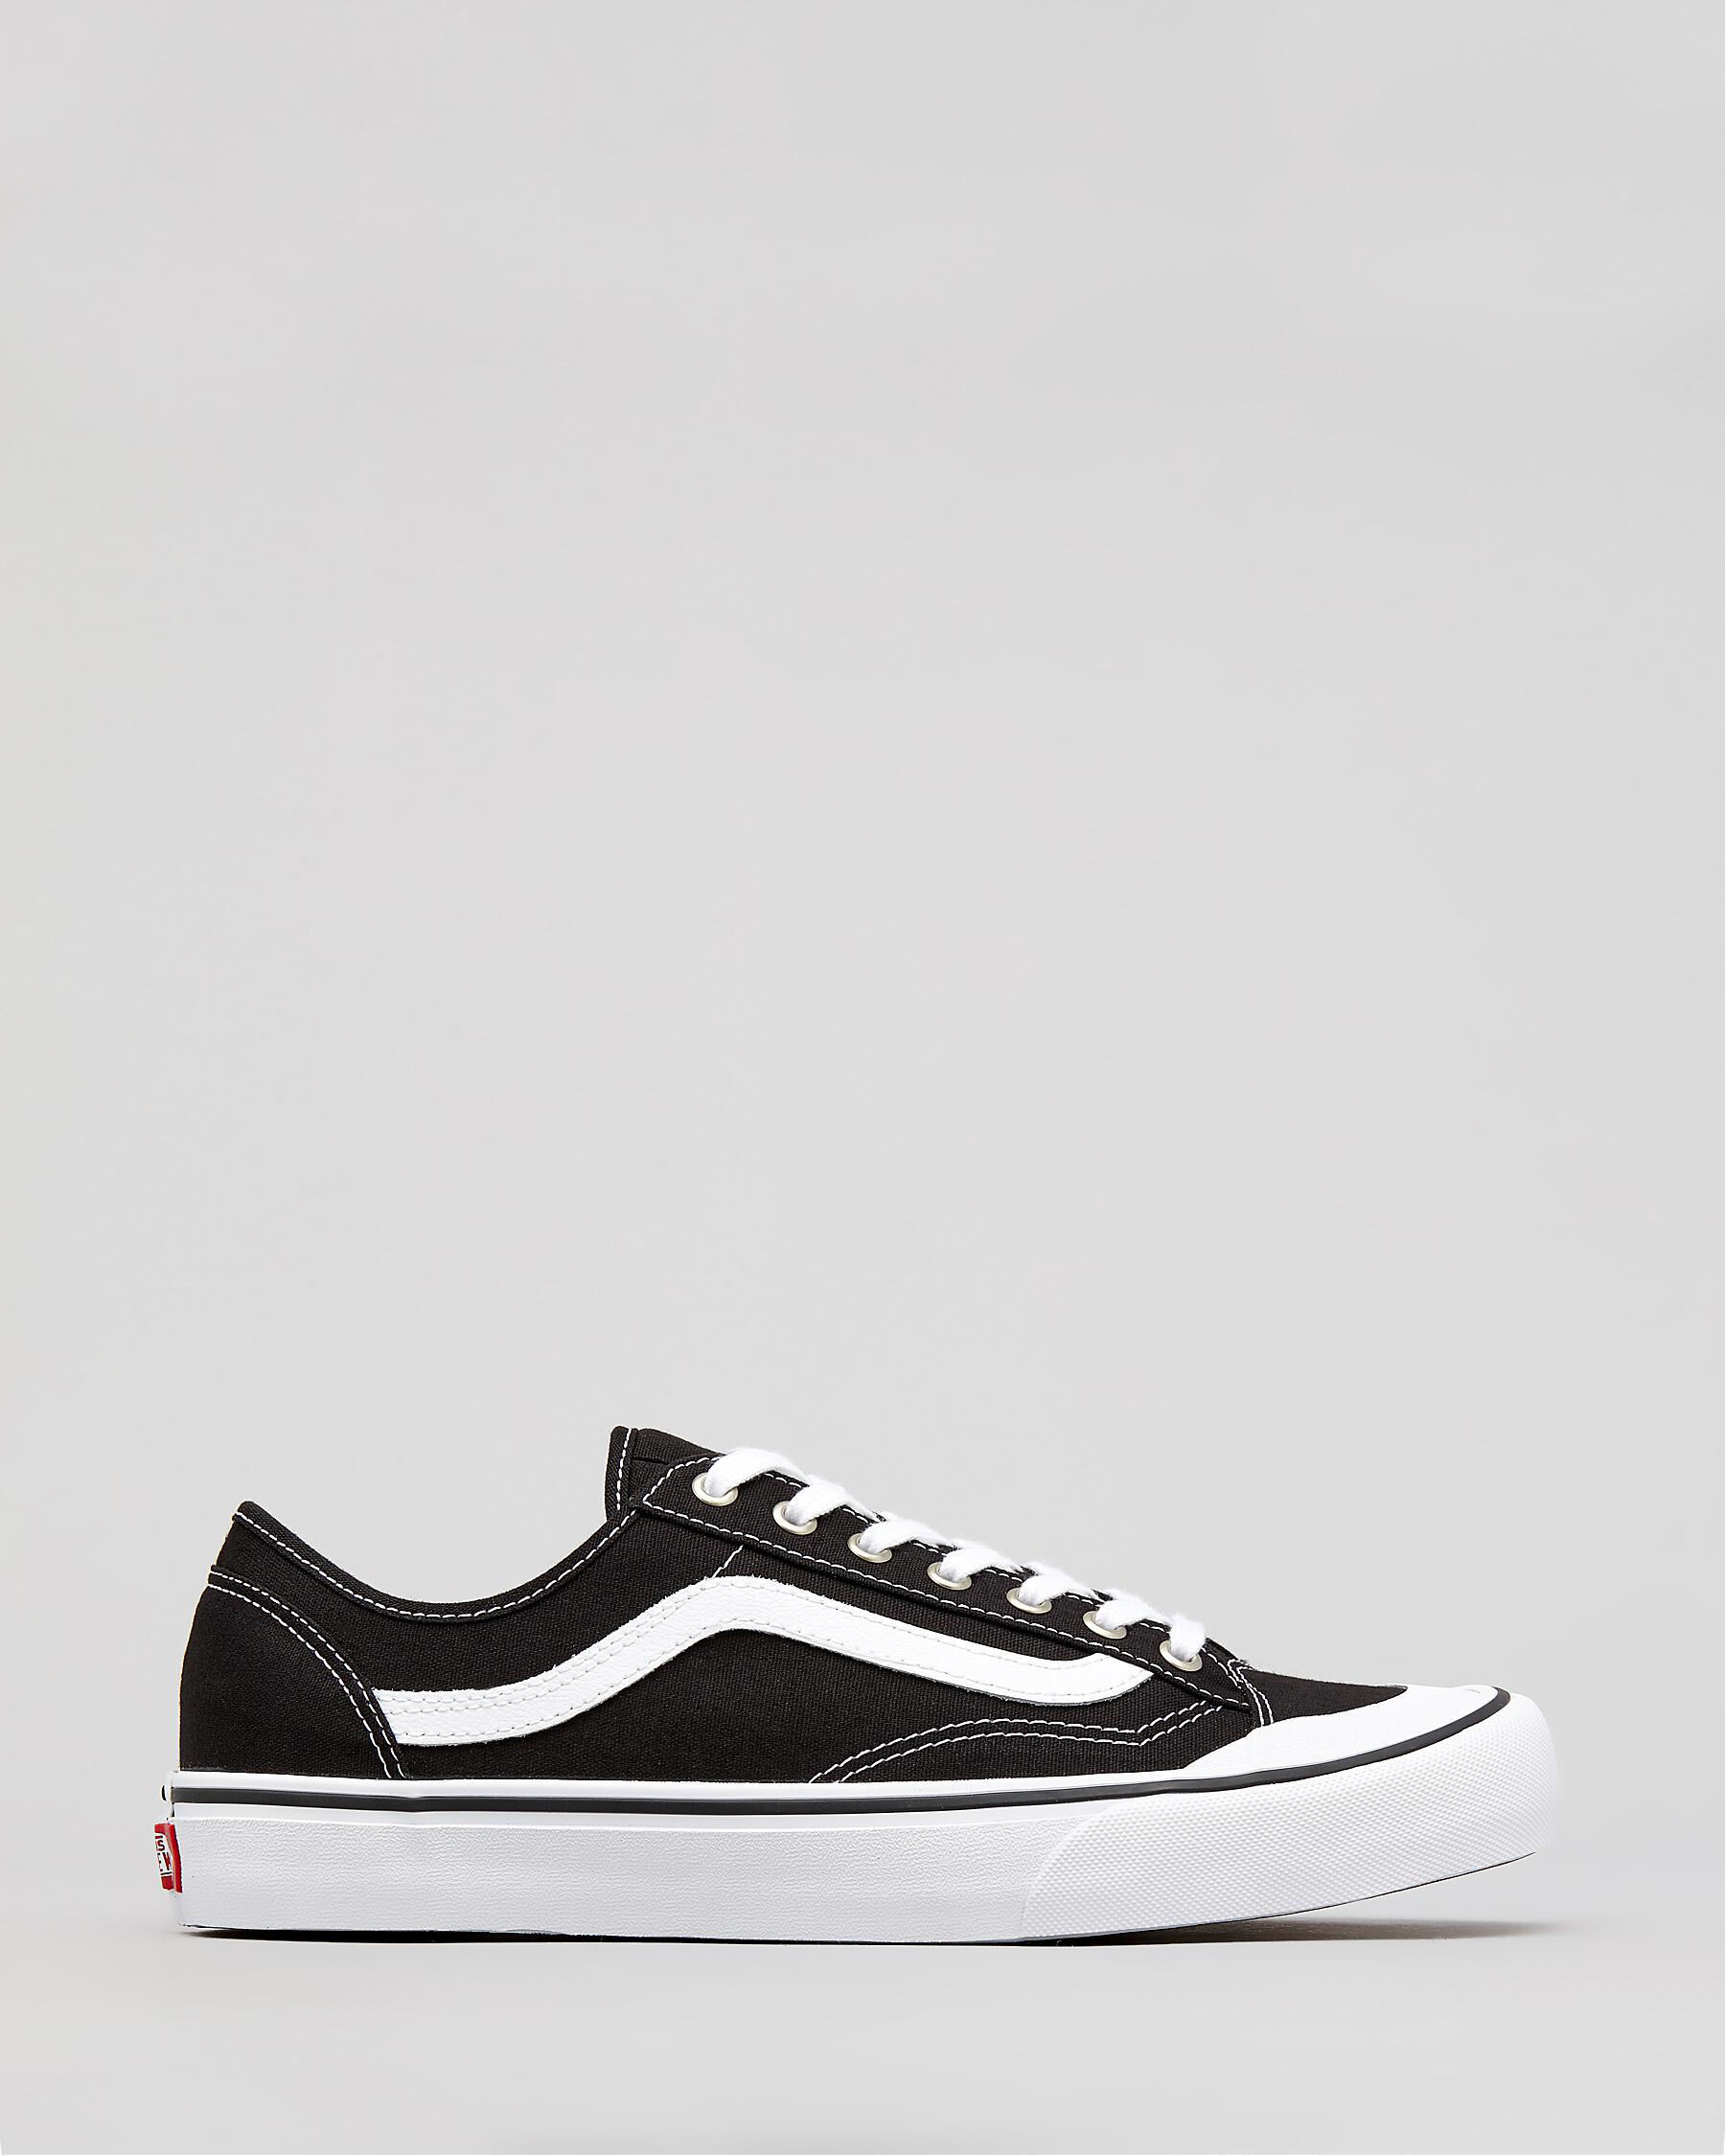 where can i buy cheap vans shoes online